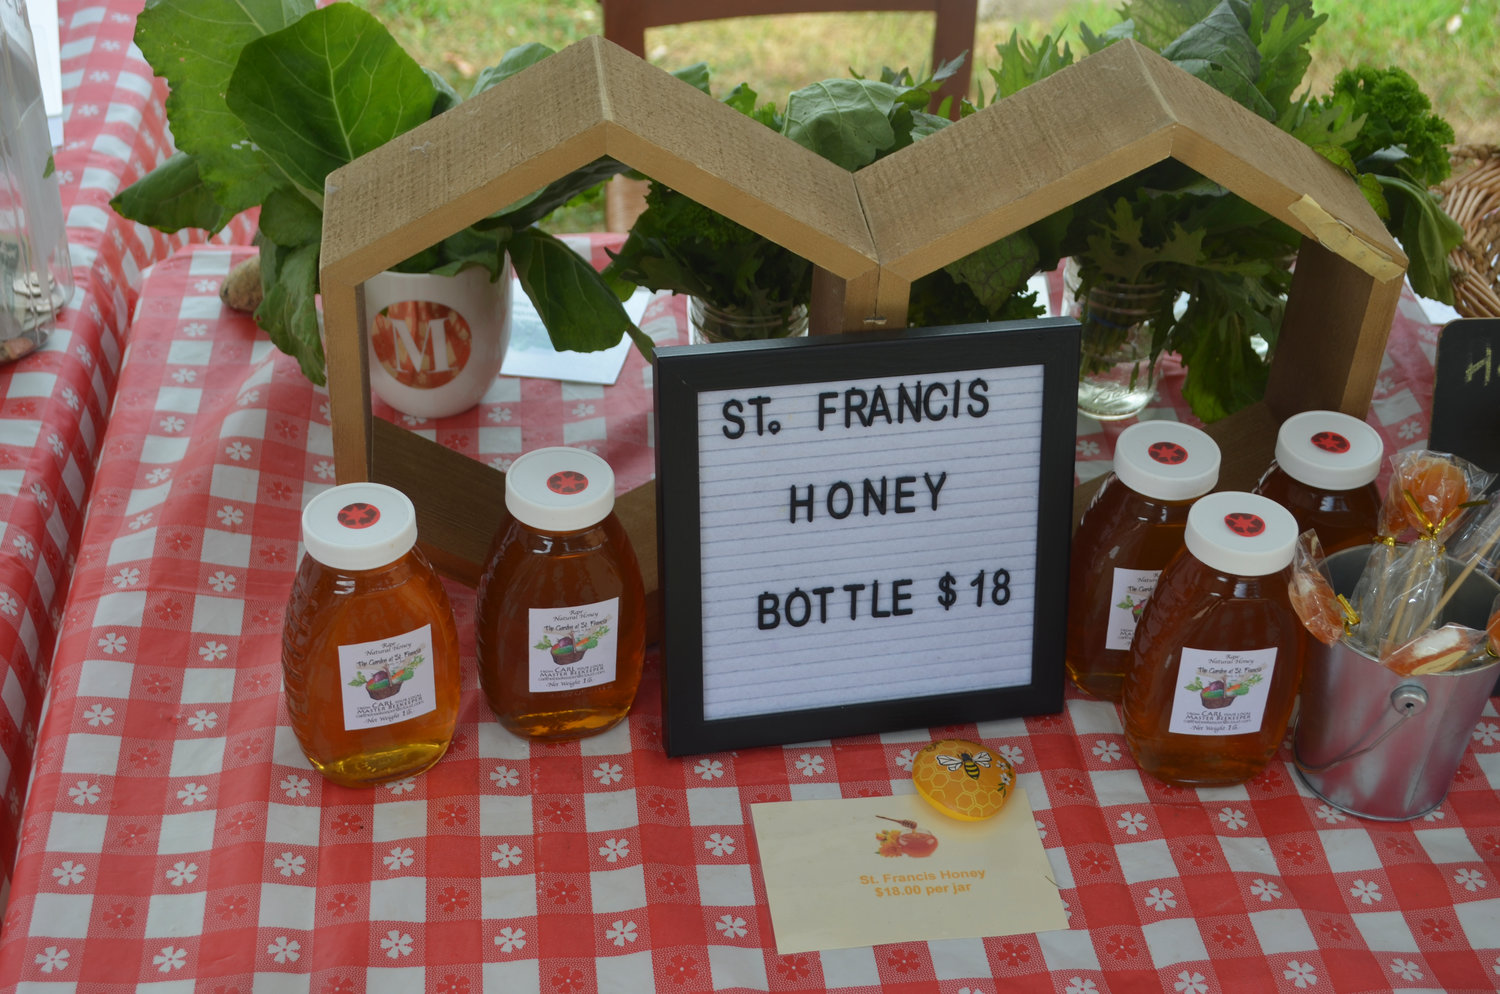 Honey, produced by the garden’s honeybee colony, is sold each week.